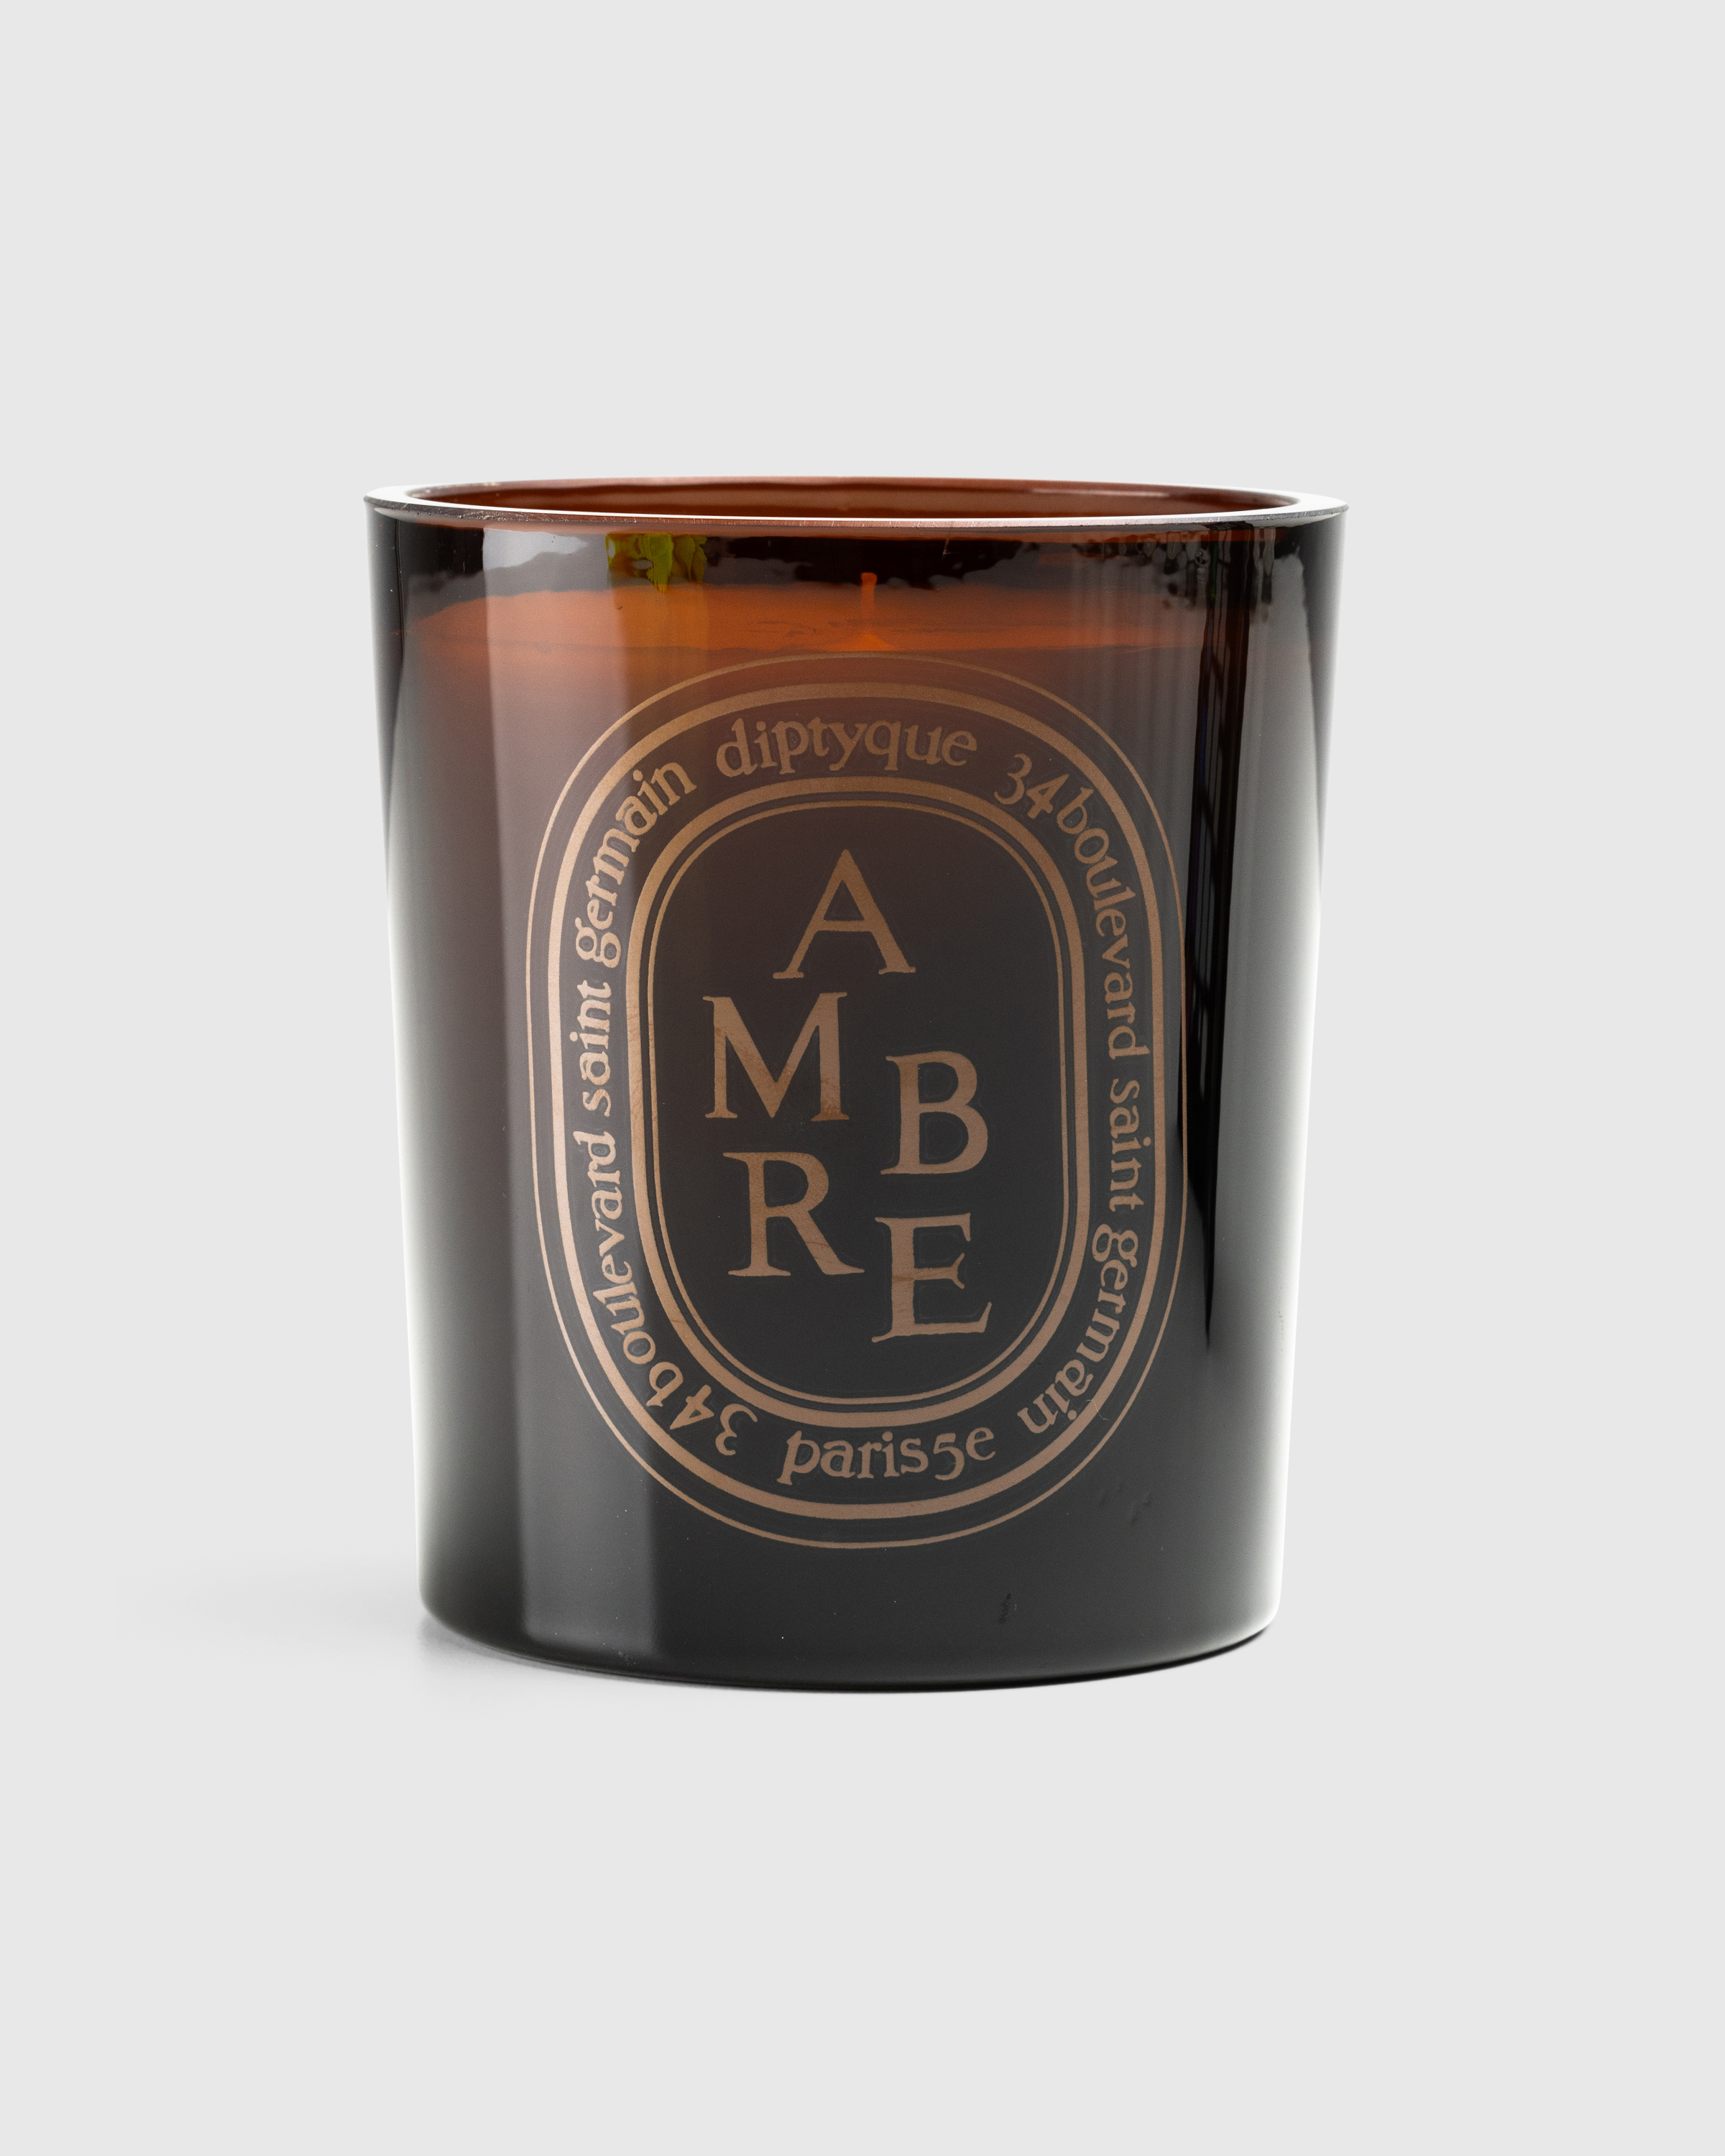 Diptyque – Amber Candle Ambre 300g - Candles & Fragrances - Brown - Image 1